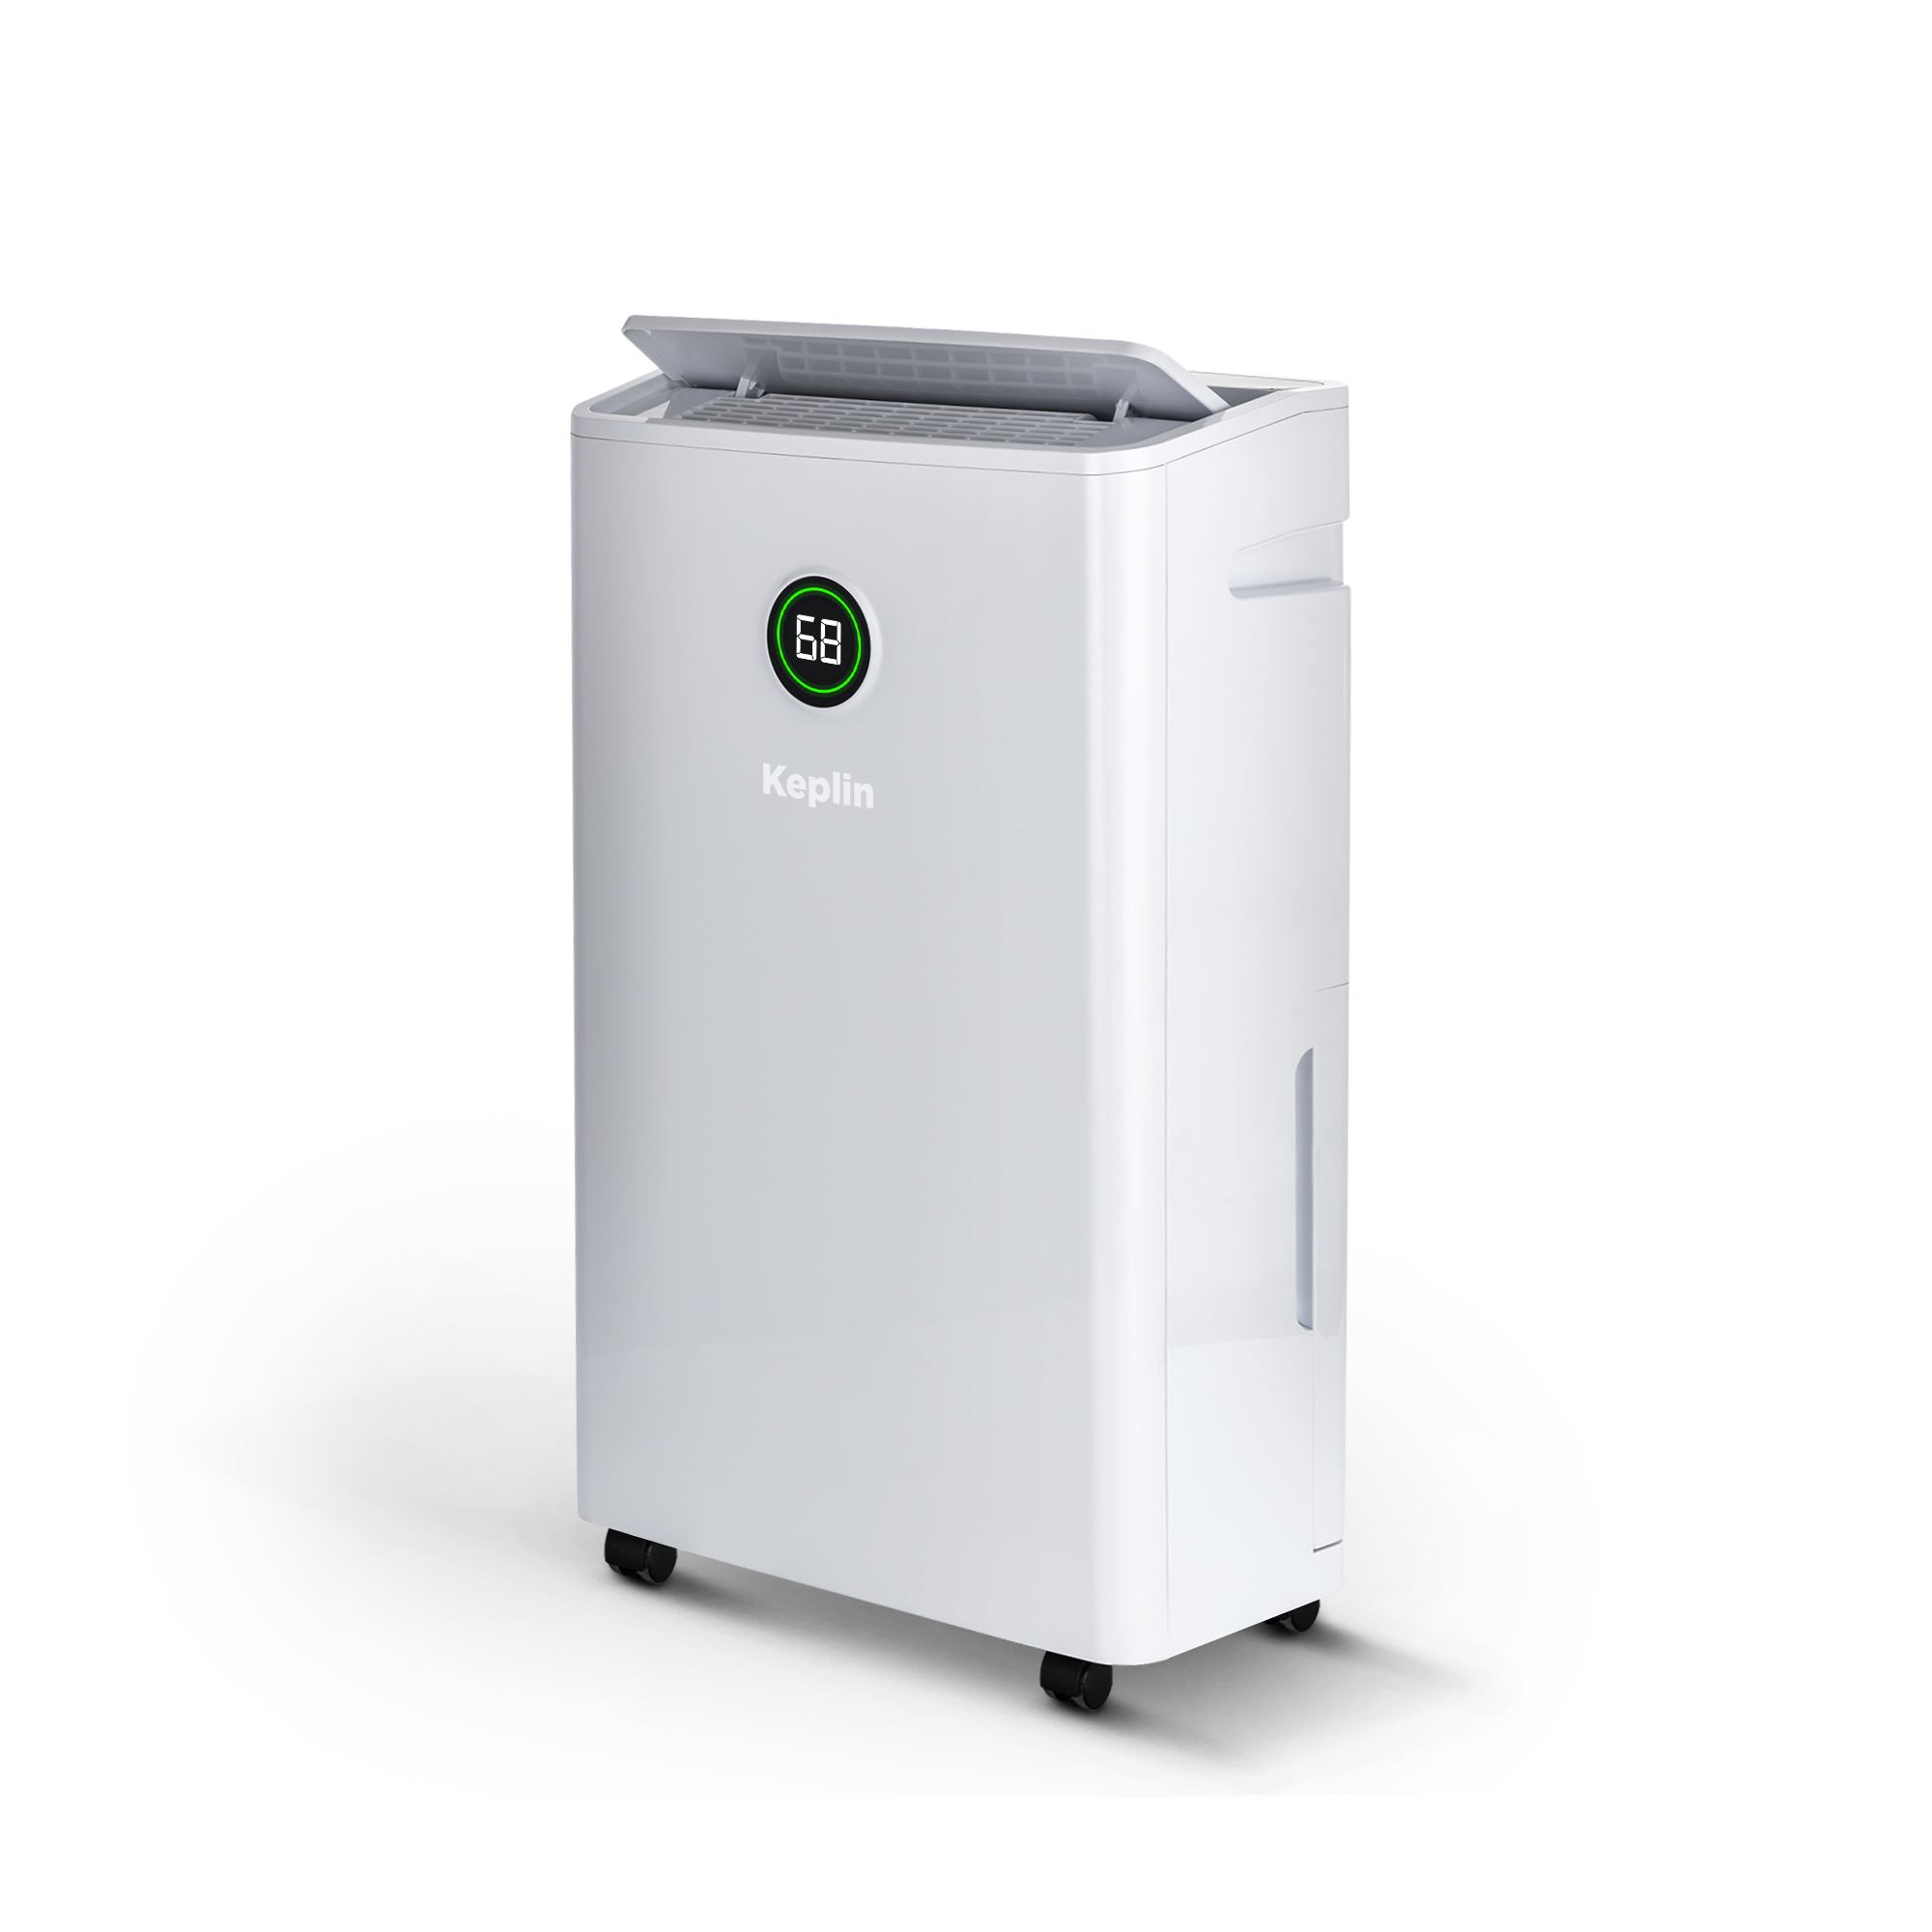 20L Dehumidifier For Clean Air | Mold | Dry Cloth - Continuous Drainage, 24 Hour Timer, & Digital Display